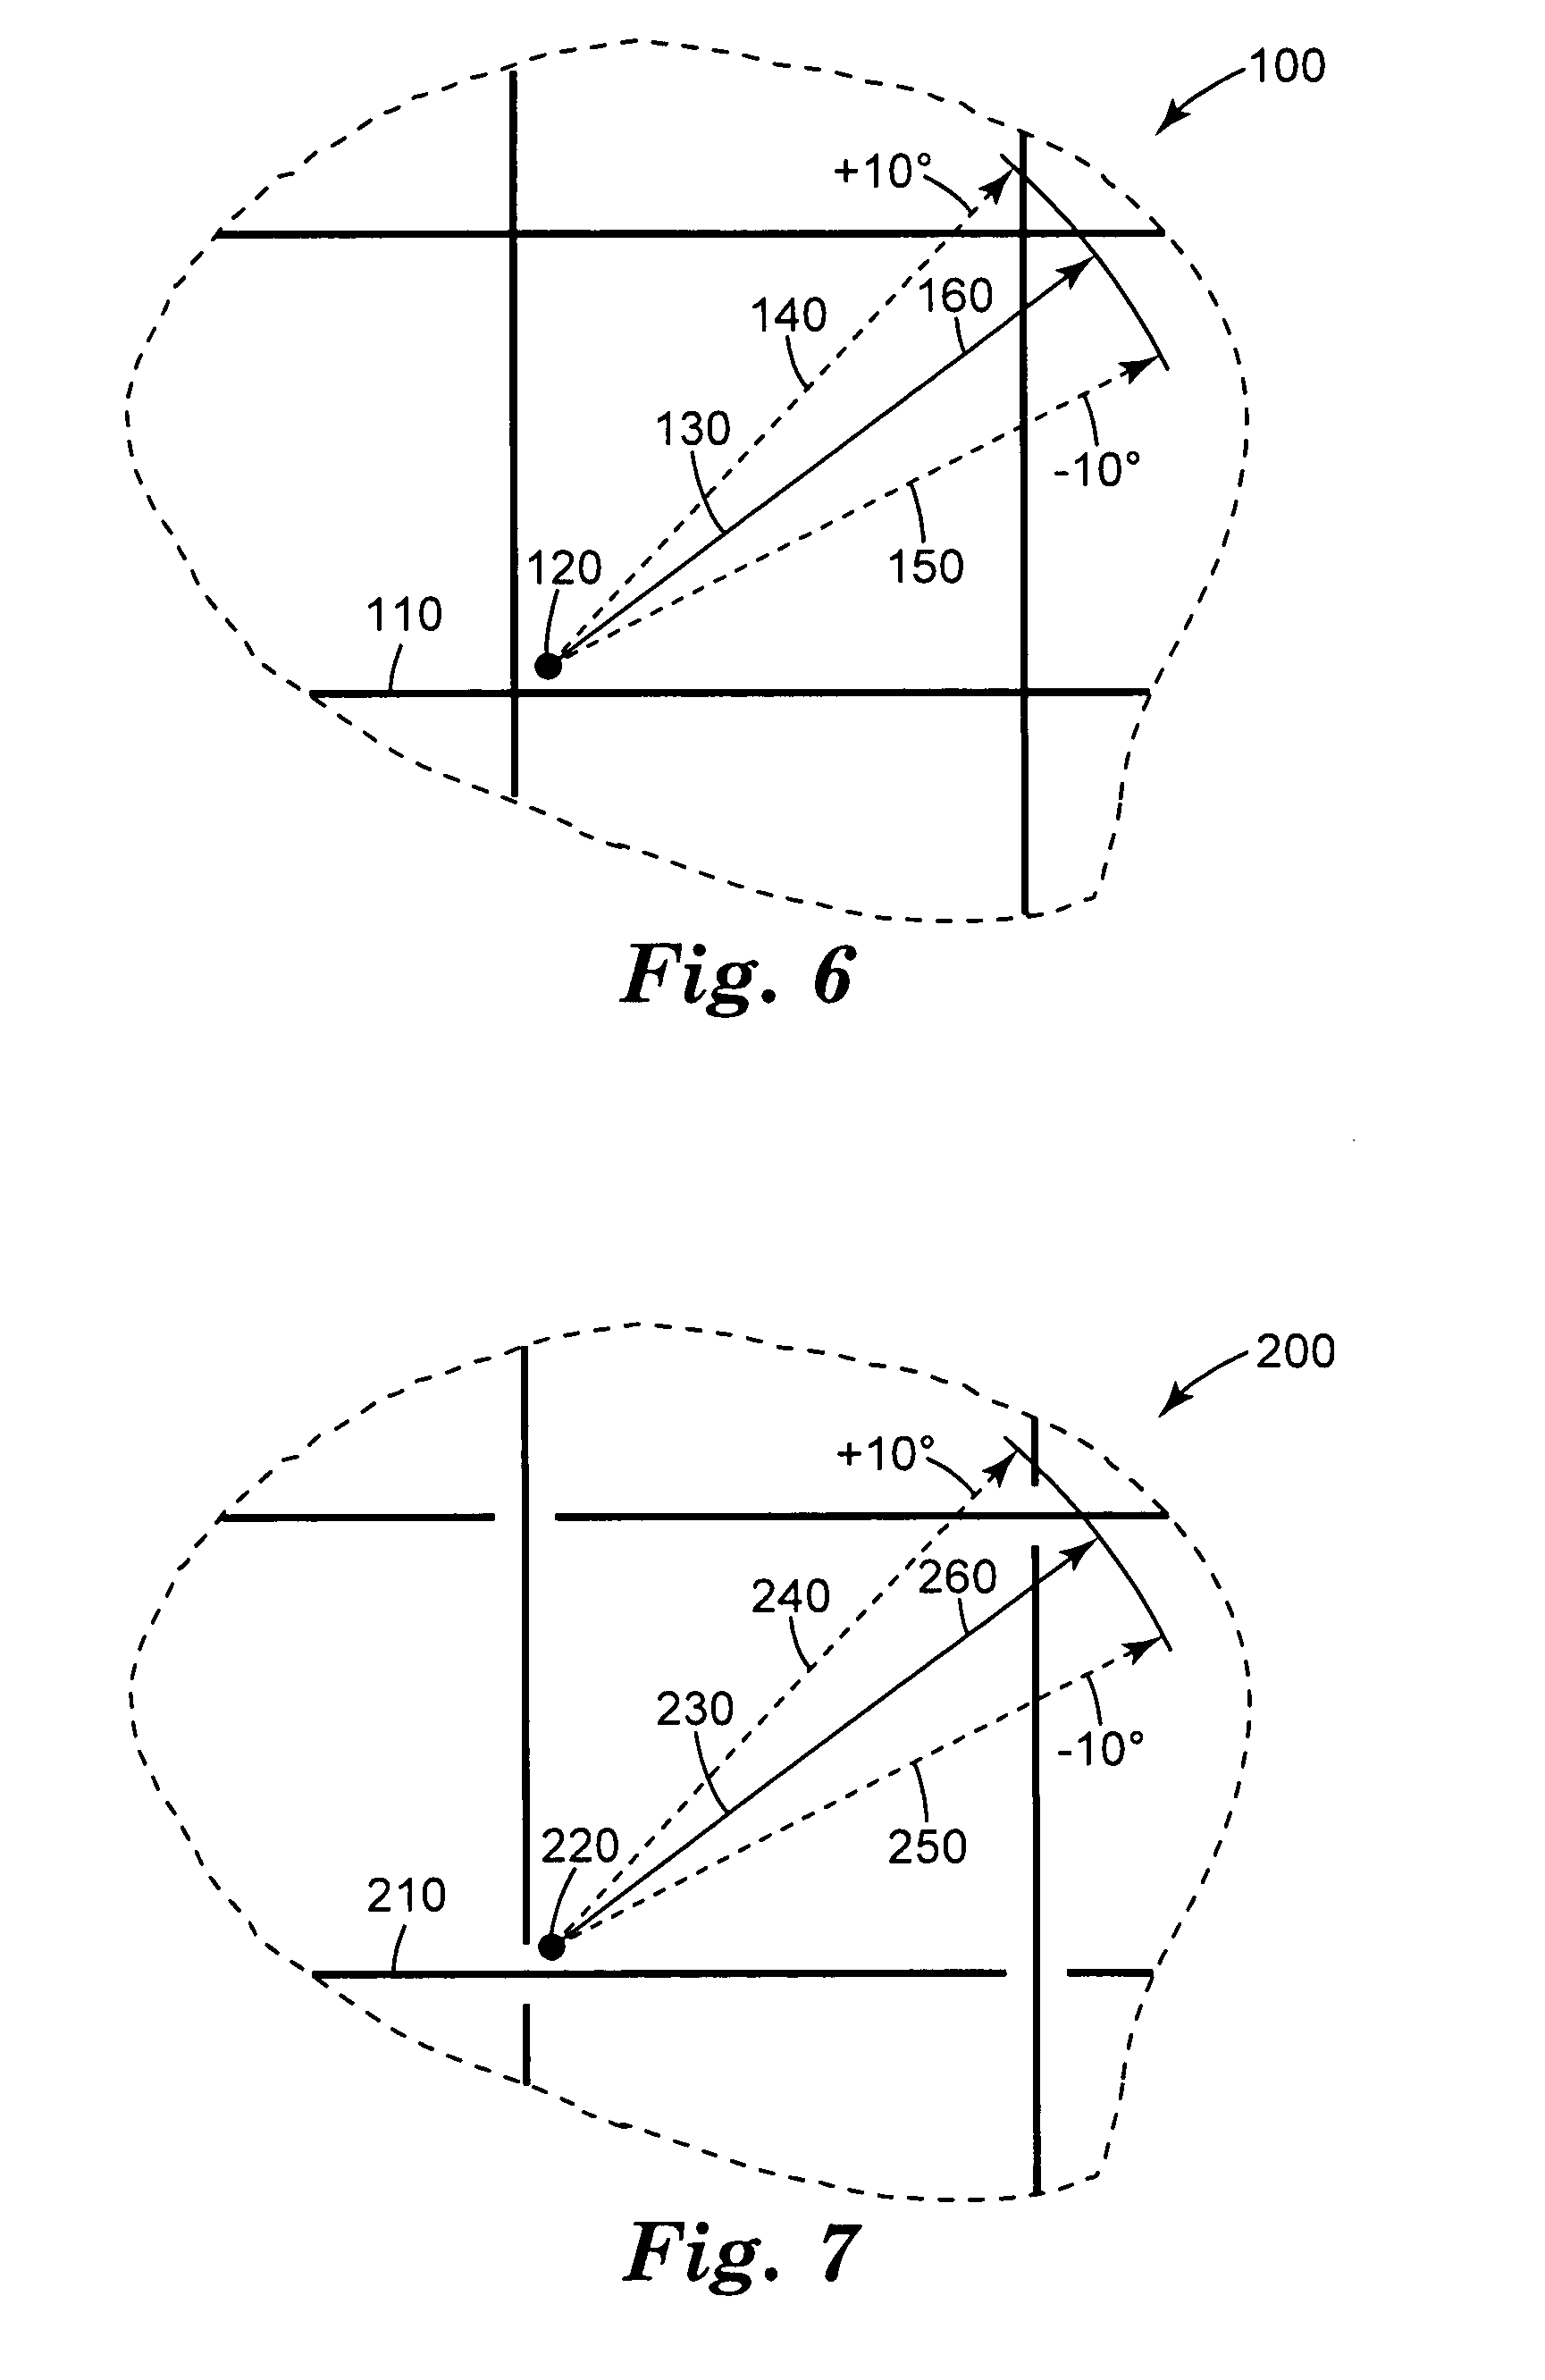 Methods of patterning a conductor on a substrate